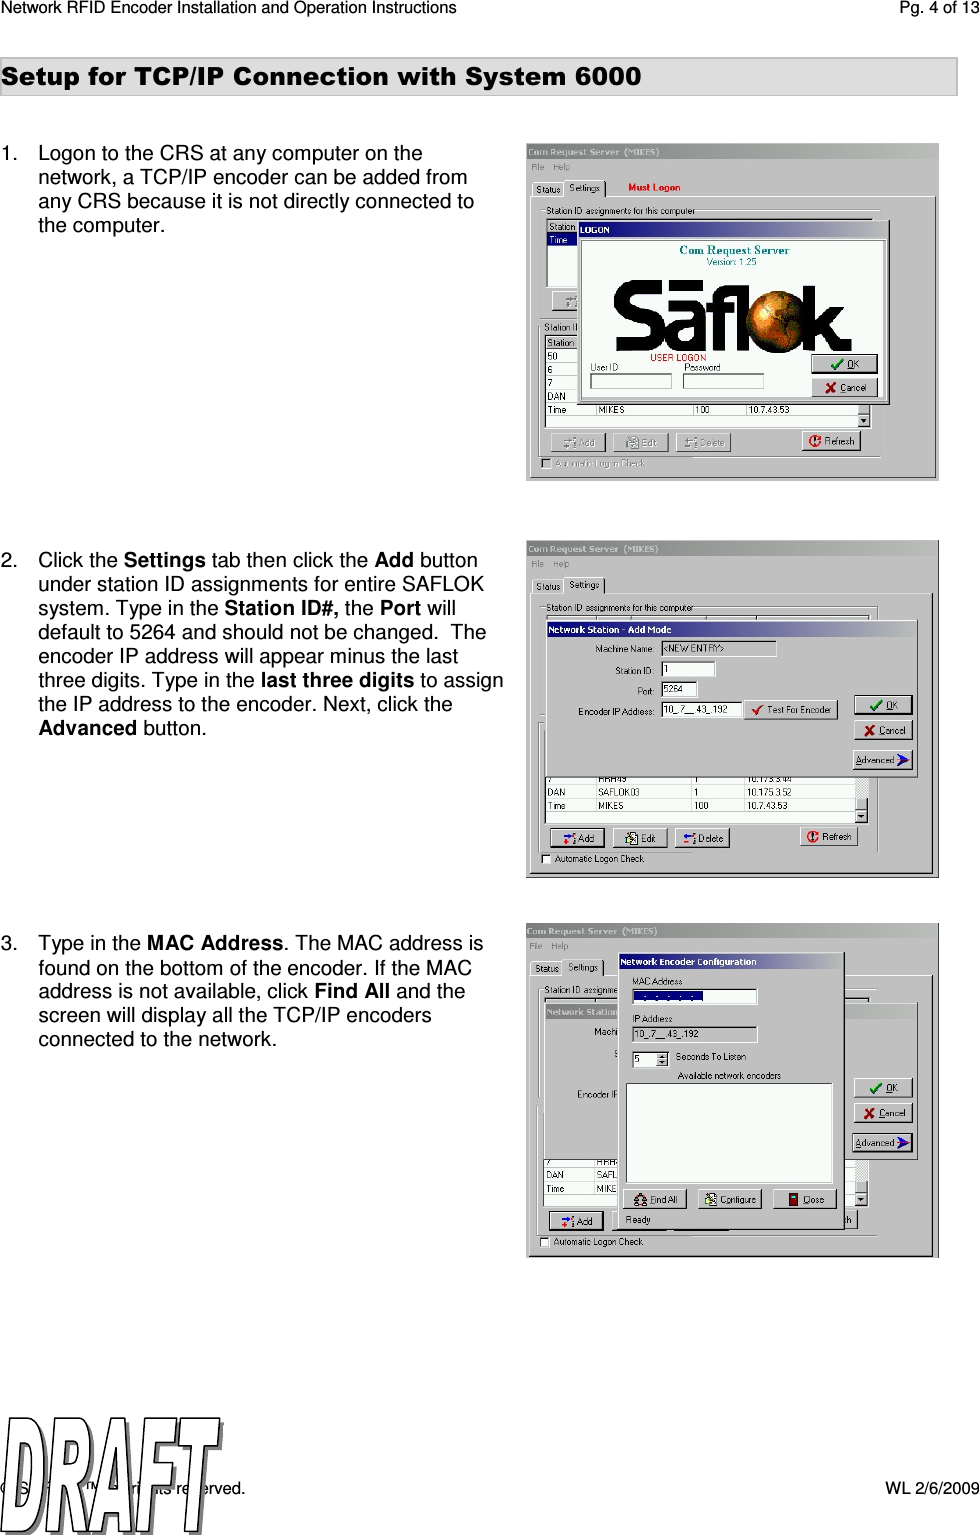 Network RFID Encoder Installation and Operation Instructions  Pg. 4 of 13 © SAFLOK™, all rights reserved.    WL 2/6/2009 Setup for TCP/IP Connection with System 6000   1.  Logon to the CRS at any computer on the network, a TCP/IP encoder can be added from any CRS because it is not directly connected to the computer.              2.  Click the Settings tab then click the Add button under station ID assignments for entire SAFLOK system. Type in the Station ID#, the Port will default to 5264 and should not be changed.  The encoder IP address will appear minus the last three digits. Type in the last three digits to assign the IP address to the encoder. Next, click the Advanced button.         3.  Type in the MAC Address. The MAC address is found on the bottom of the encoder. If the MAC address is not available, click Find All and the screen will display all the TCP/IP encoders connected to the network. 